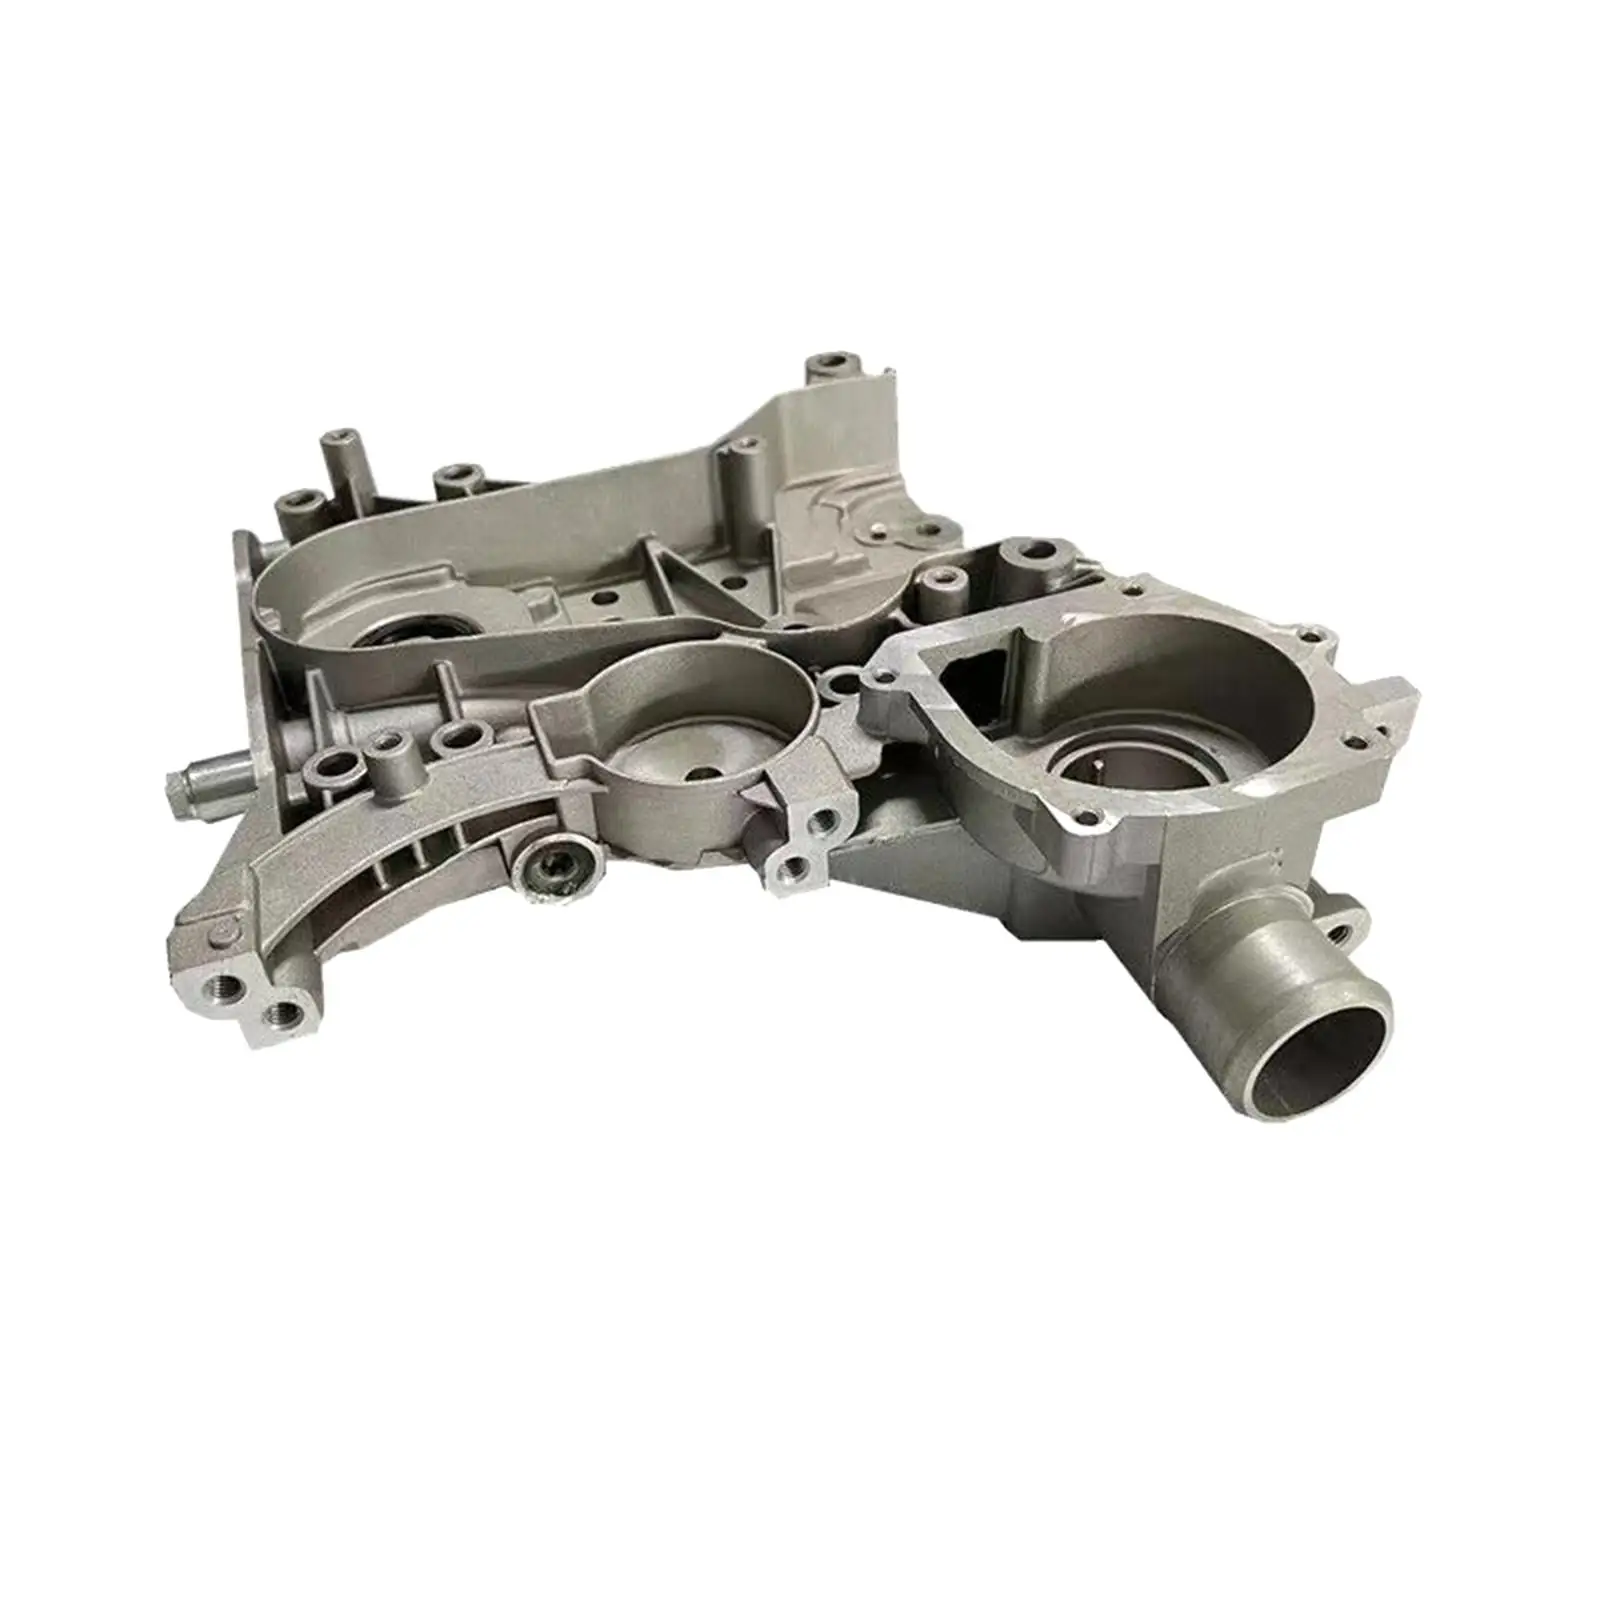 Timing Chain Oil Pump Cover 25190897 55566793 Assembly for Opel ASTRA Convenient Installation Automotive Accessories